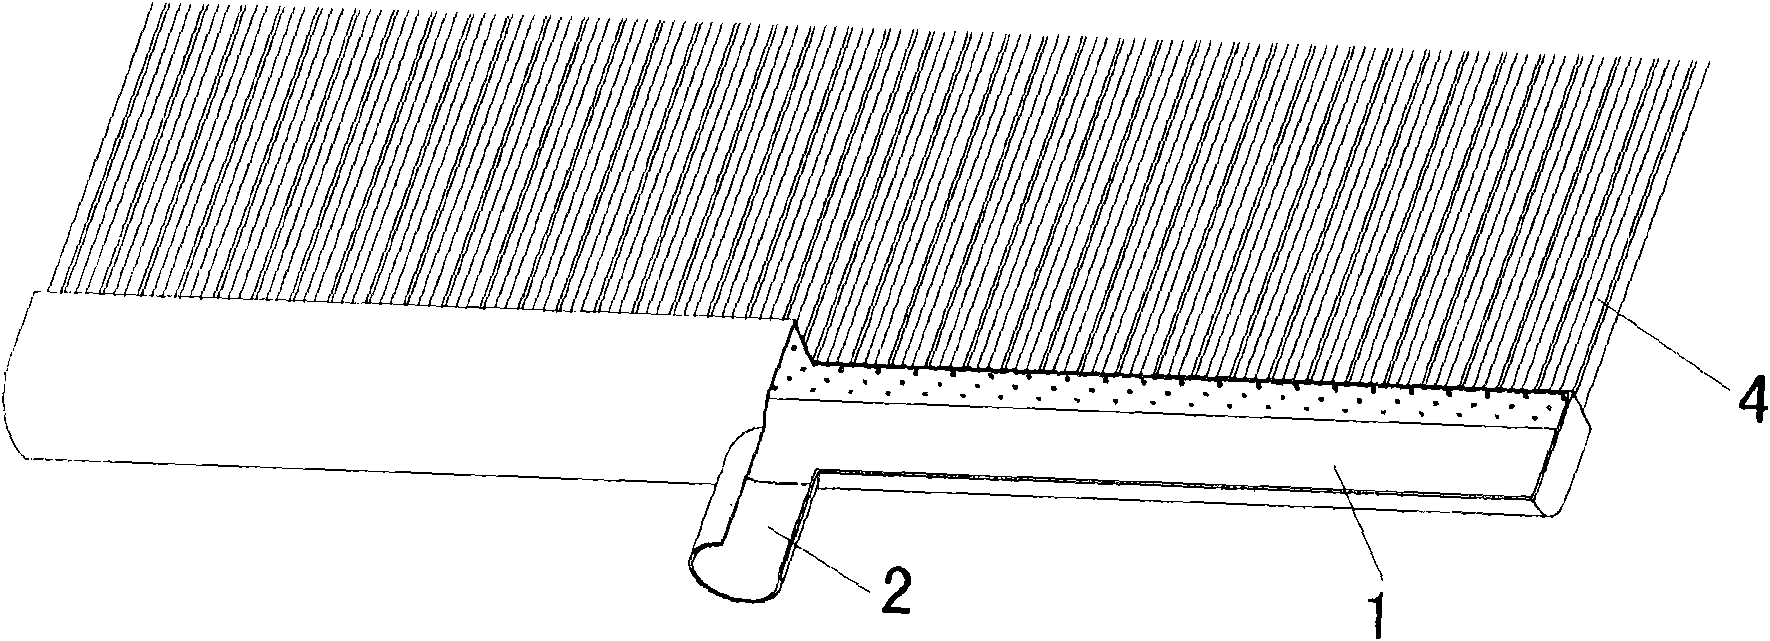 Air cooler tube box provided with flow deflectors